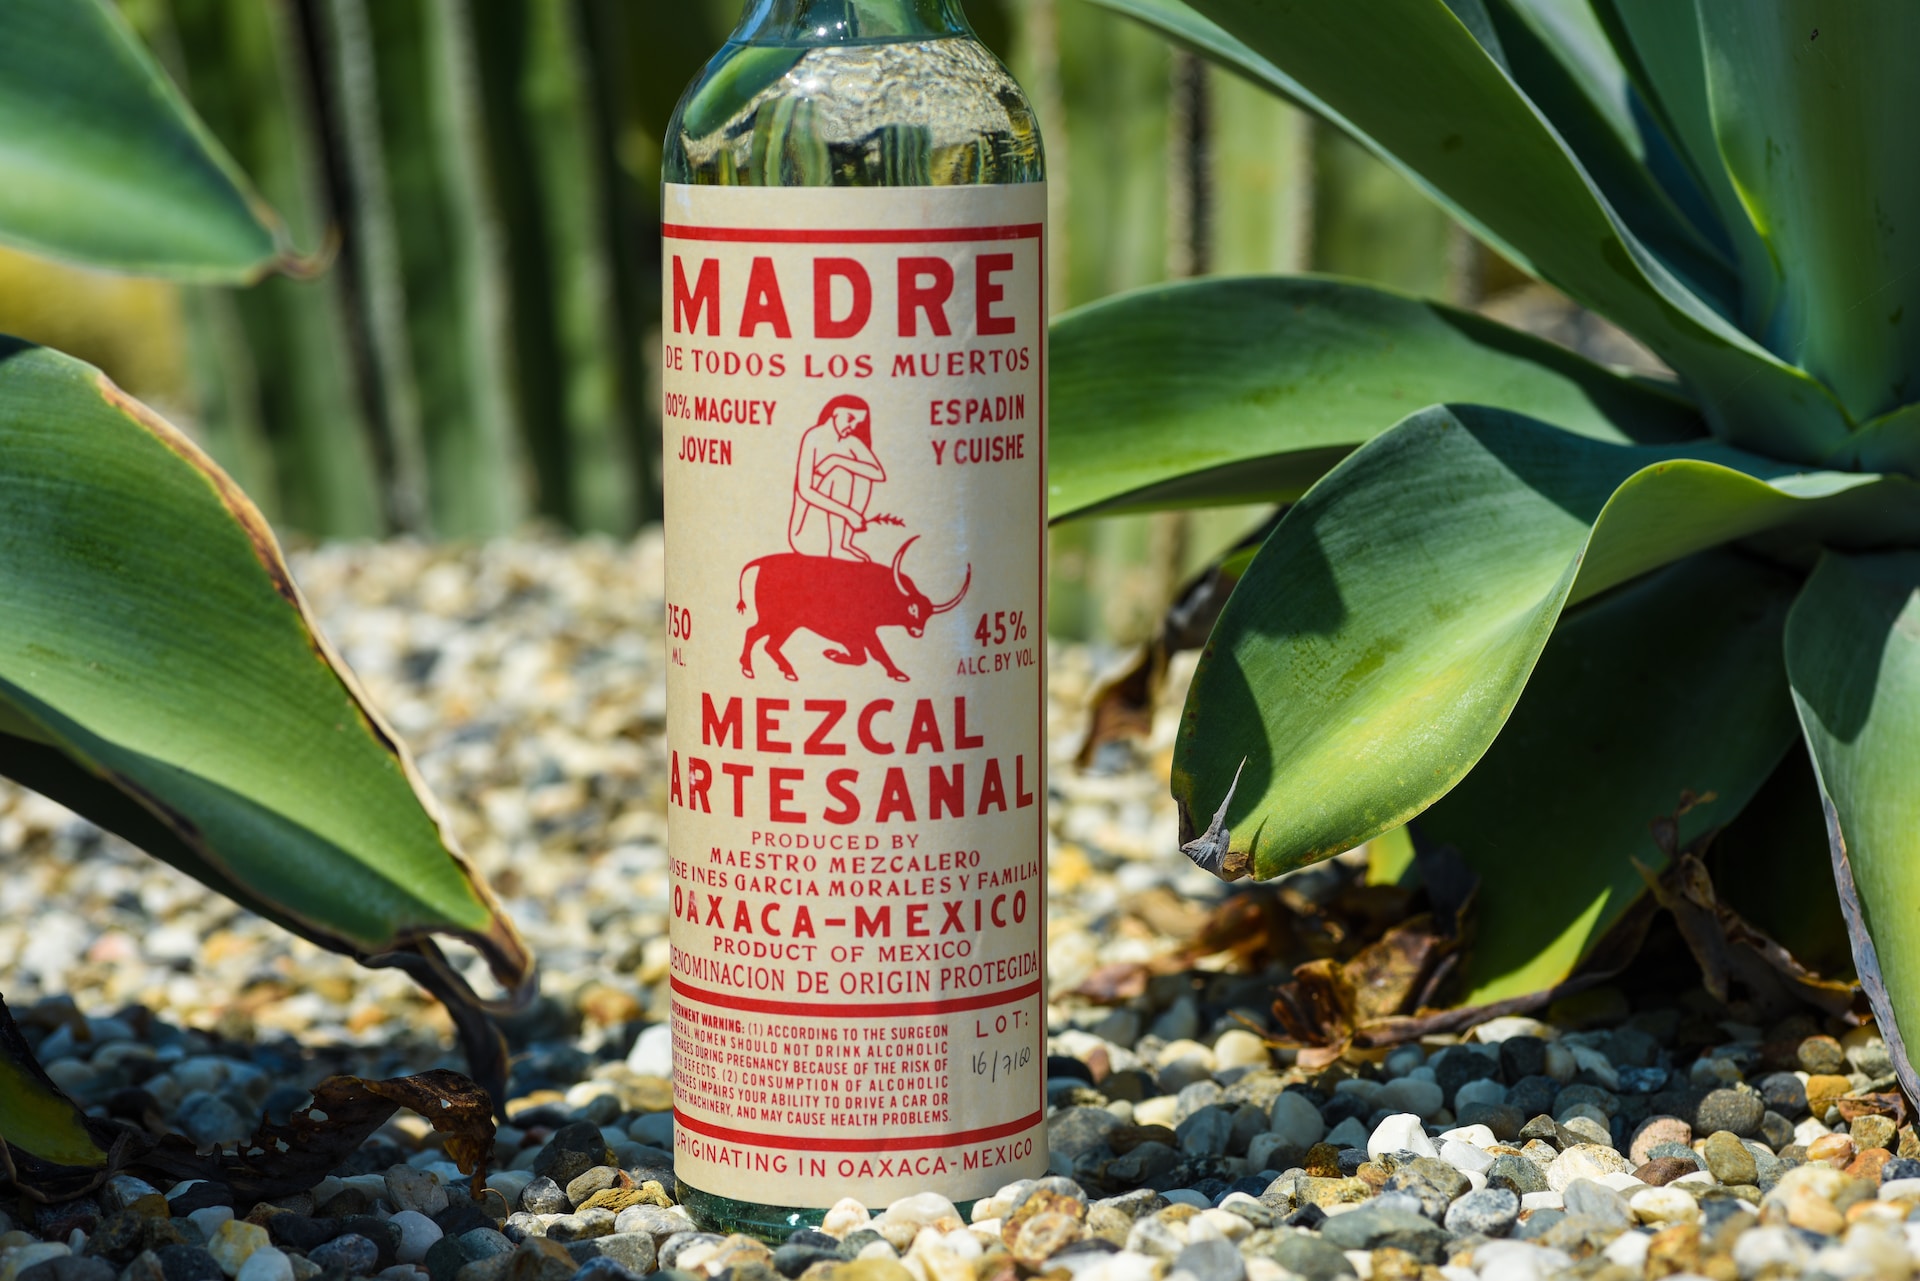 A bottle of Madre Mezcal outdoors surrounded by greenery.